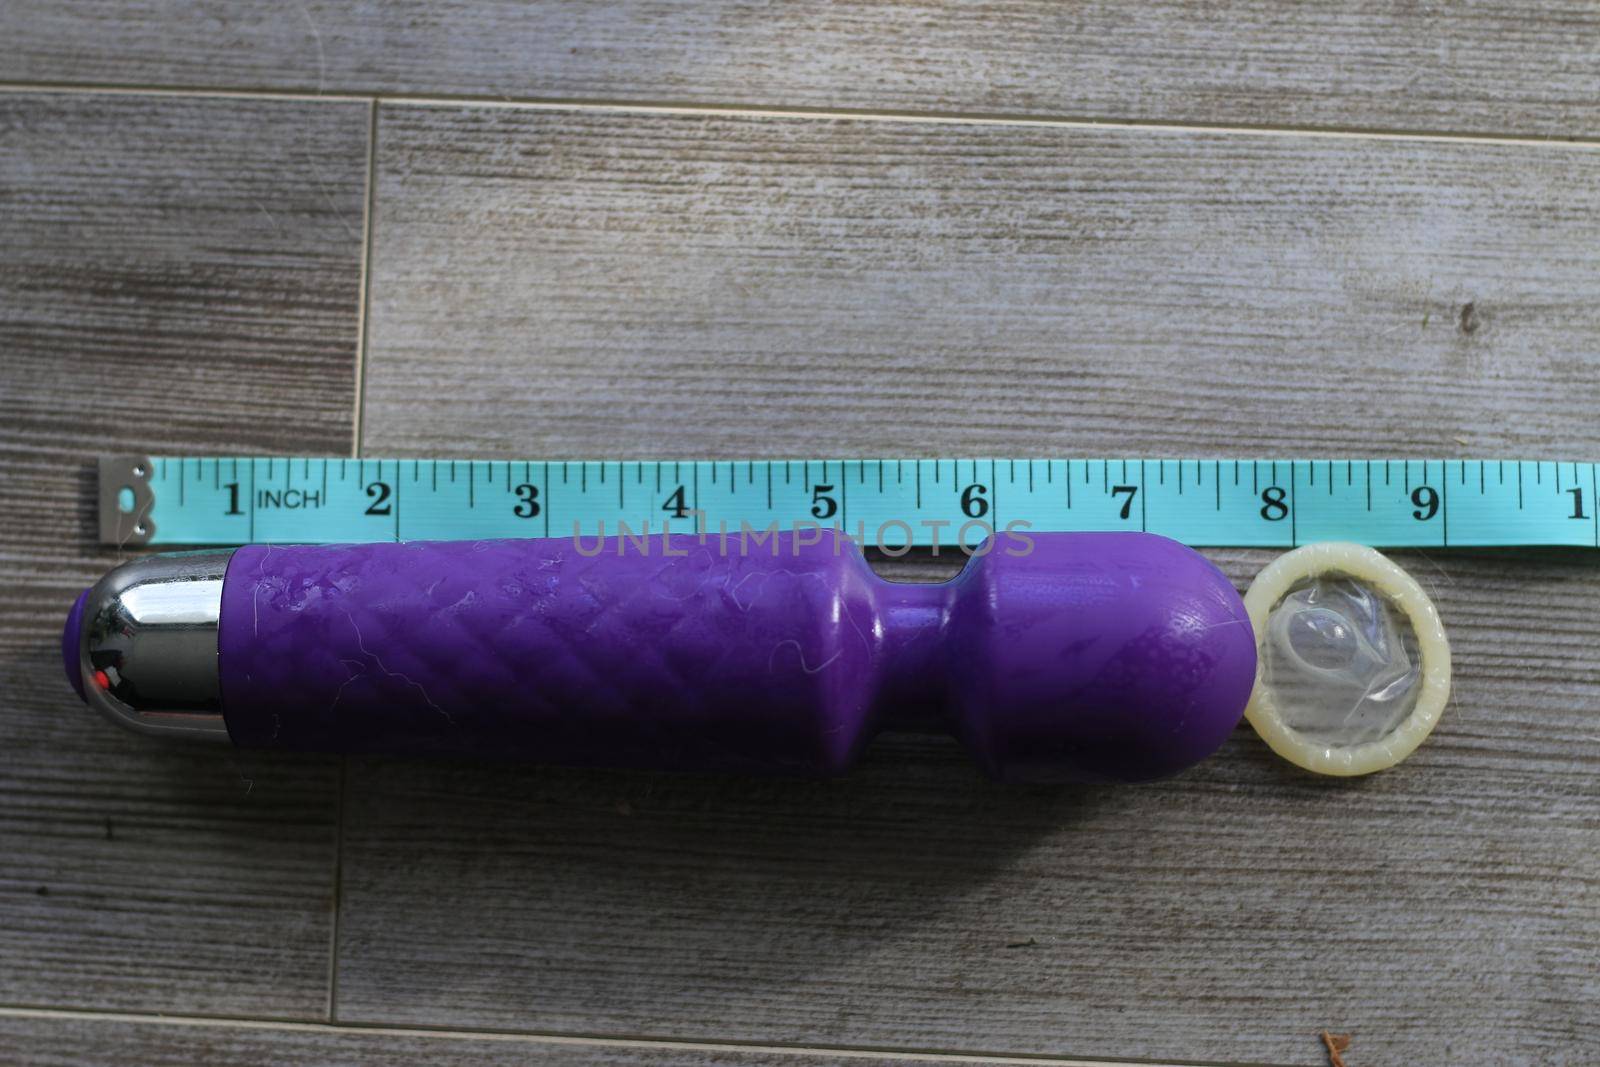 tape measurer next to a 7 inch dildo showing size. High quality photo